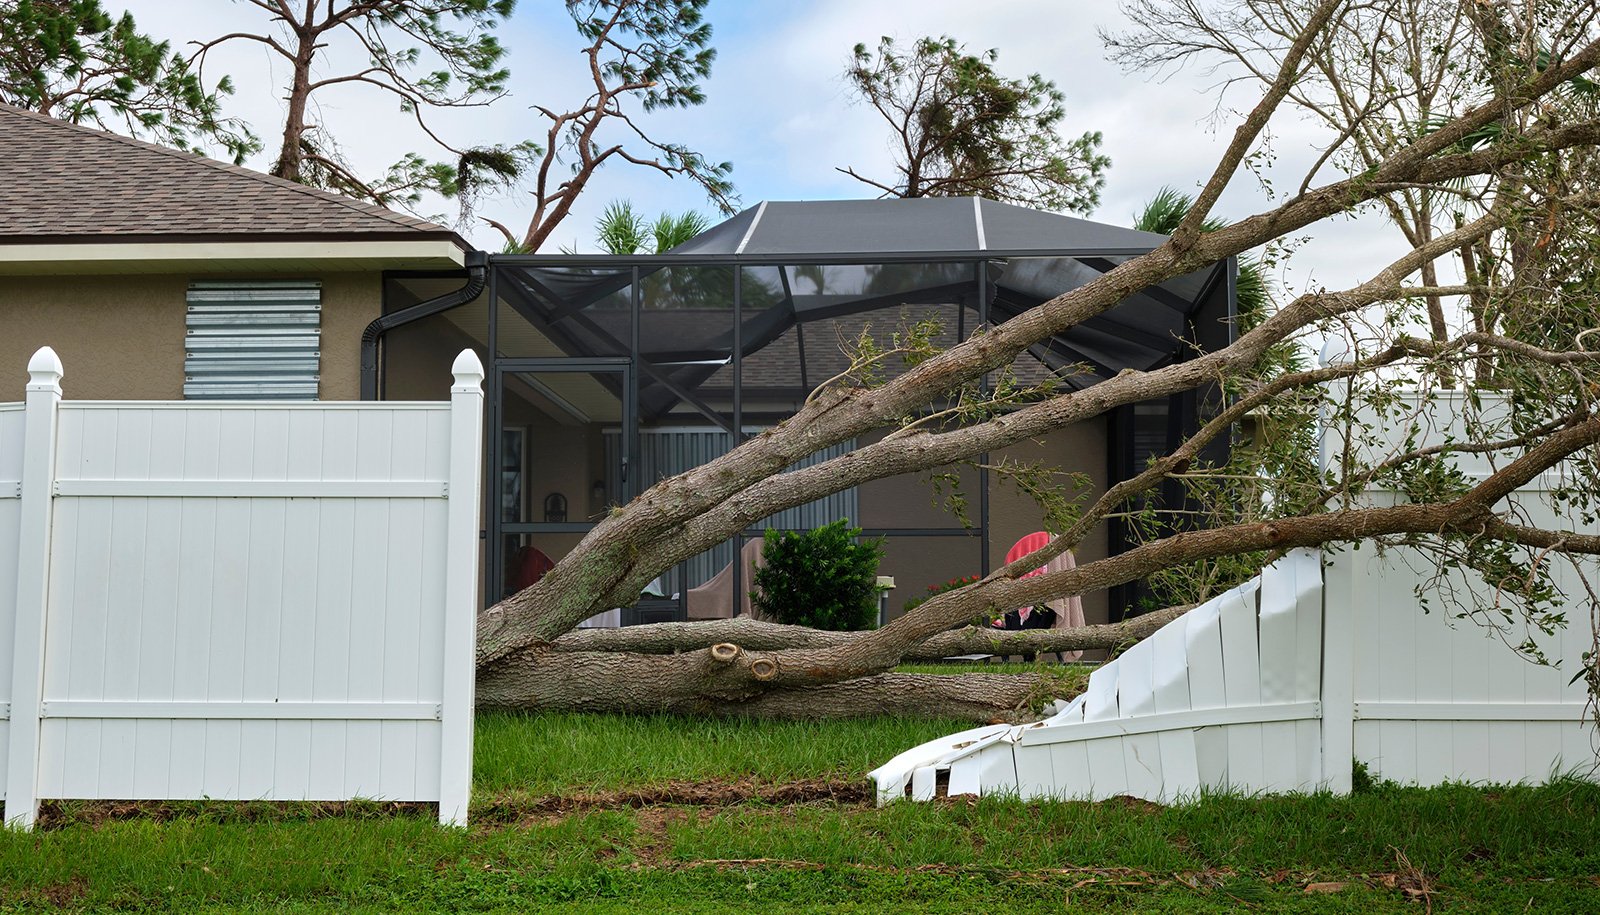 The Ultimate Overview of Wind Insurance Policy Types